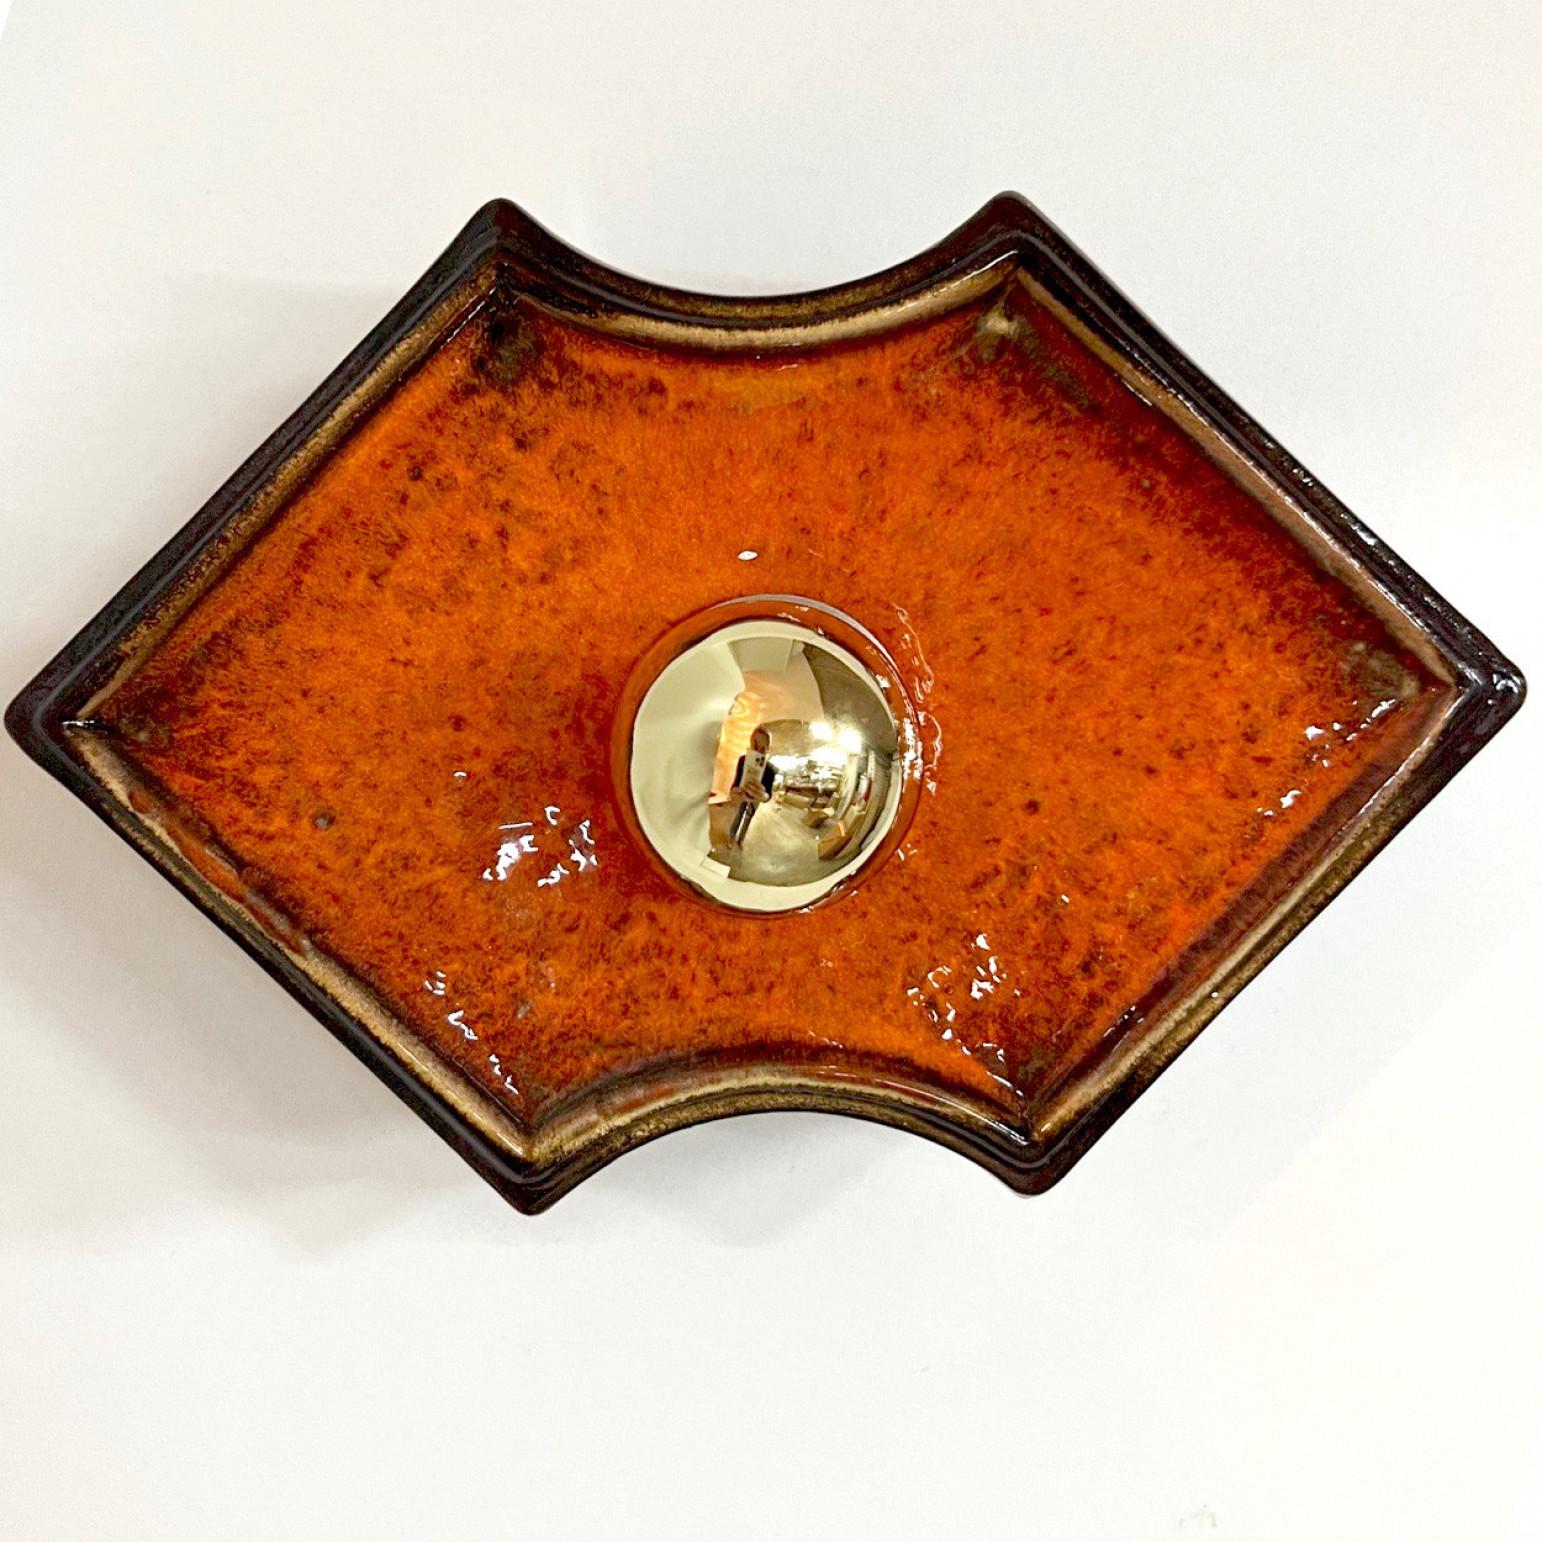 Orange and brown ceramic wall lights/flush mounts  manufactured in Germany in the 1970s.

A typical way to finish ceramic in mid-century West-Germany, Europe.
The glaze has an rich orange color which is applied on a brown base.

The lights have an